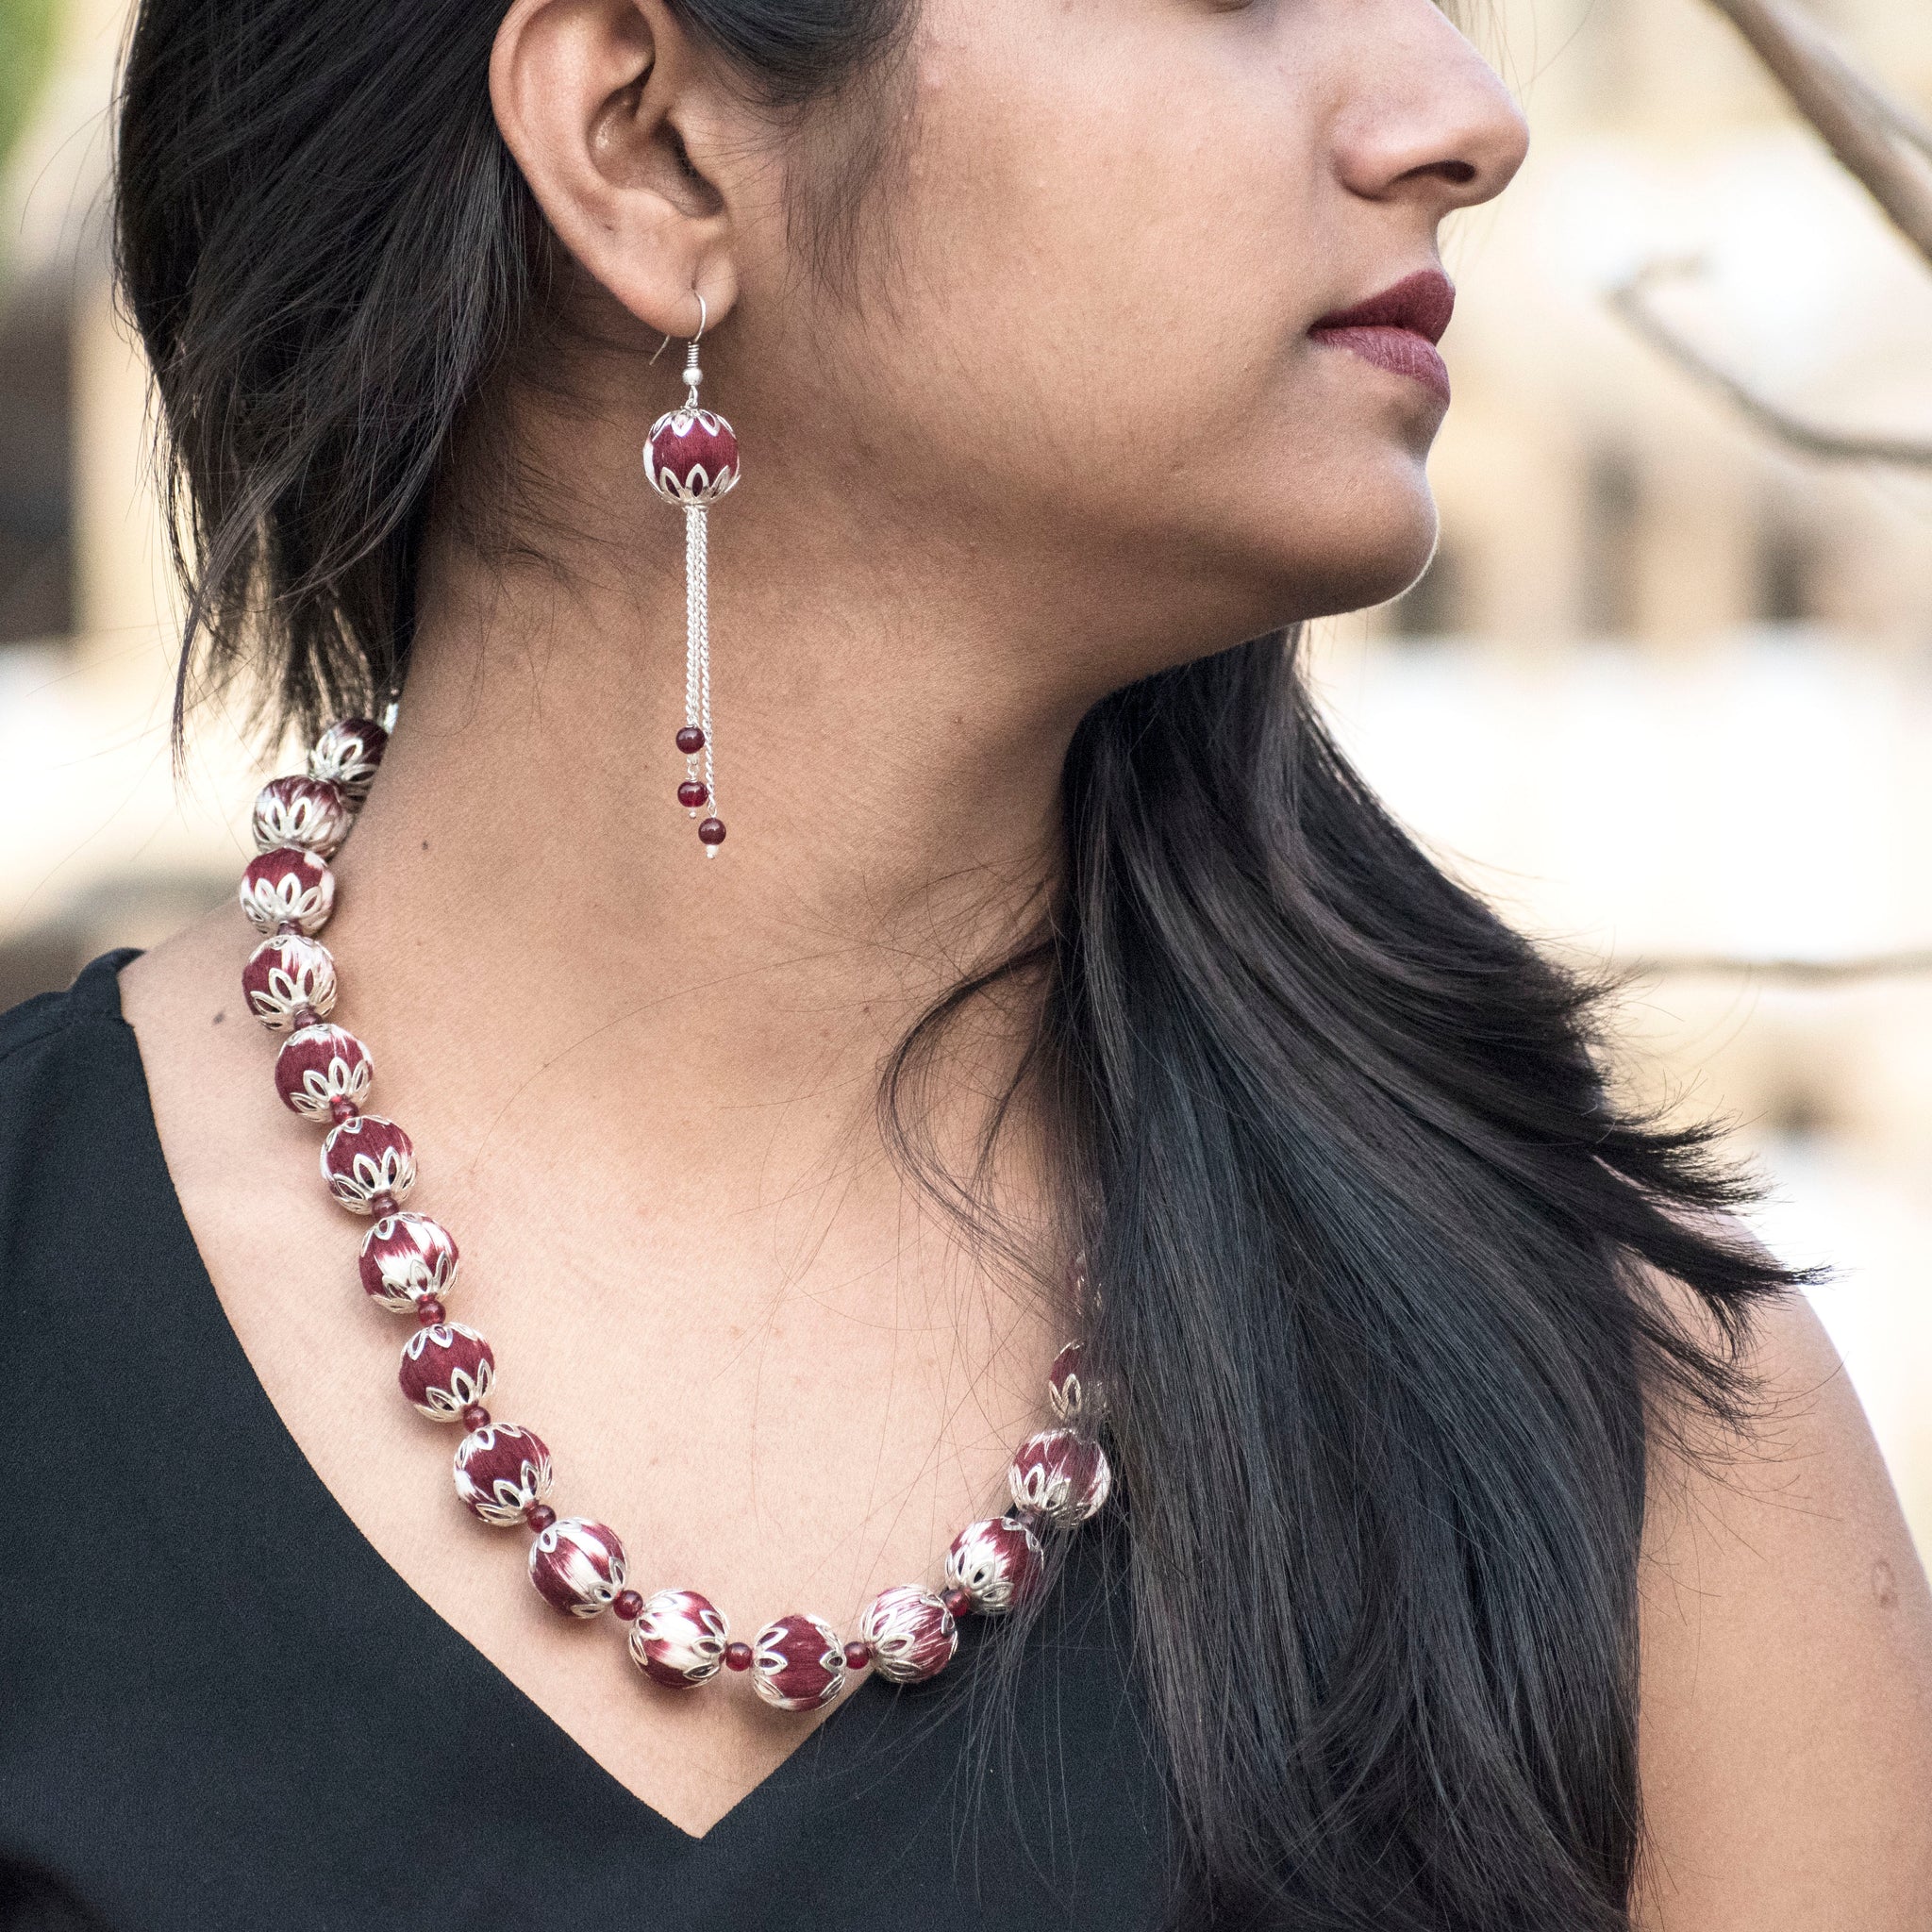 Handcrafted maroon ikat beaded necklace and earrings set